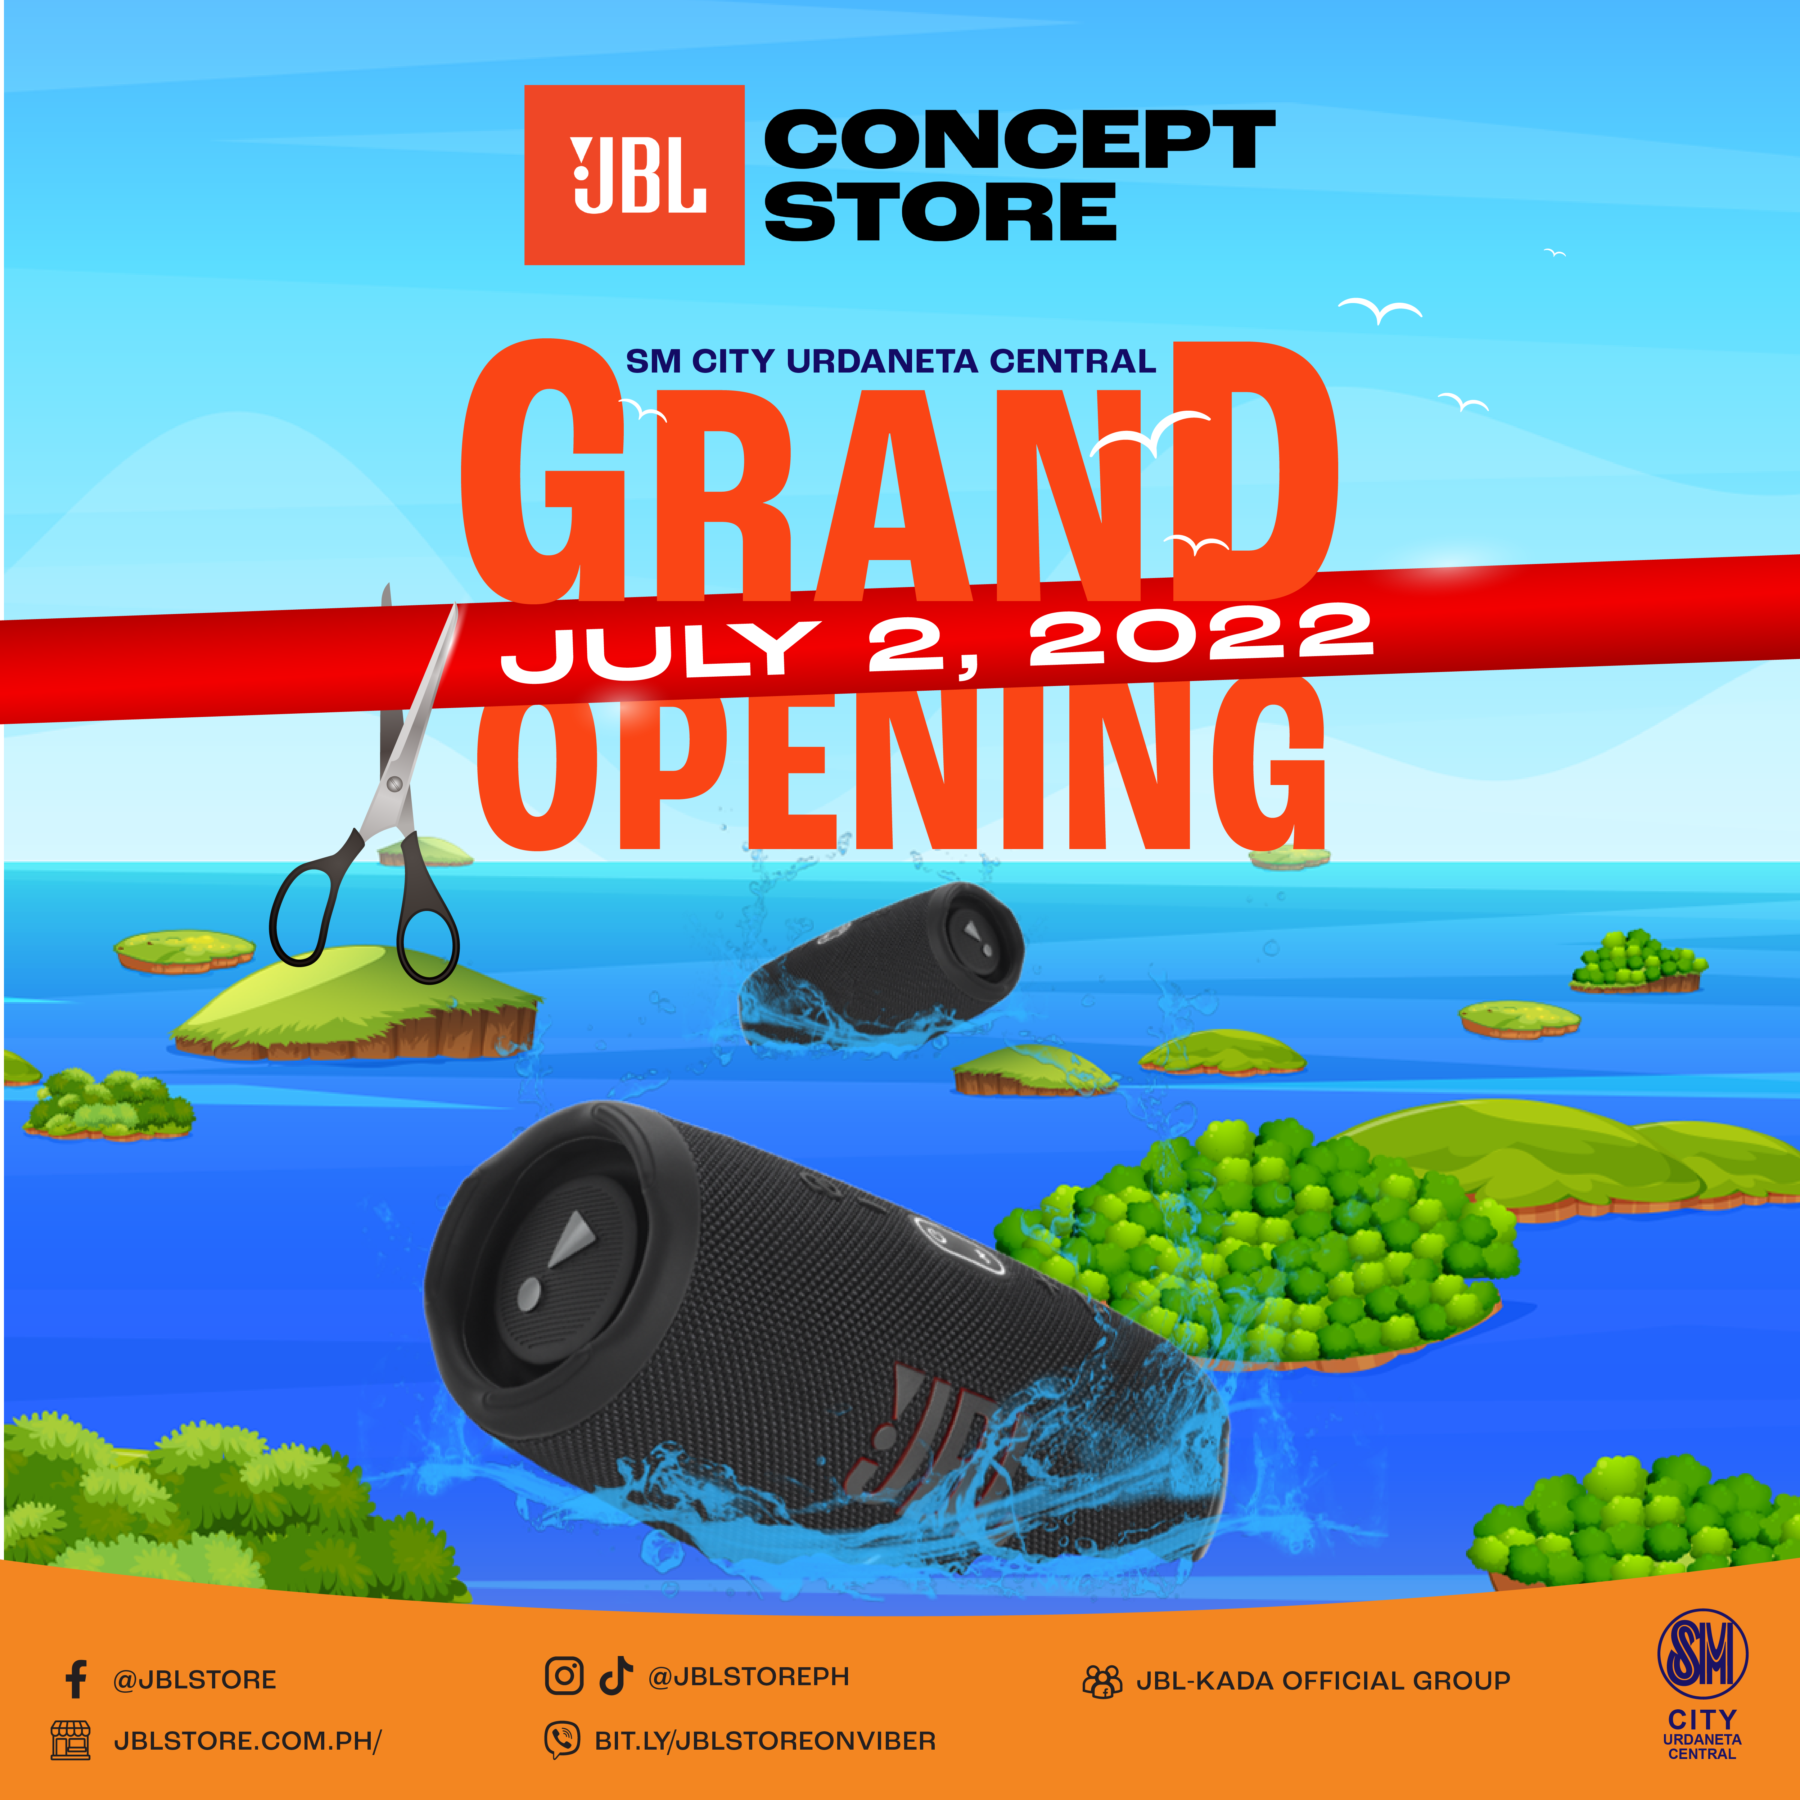 Sm Urdaneta To Have Its Own Jbl Store With Grand Opening On July 2Nd